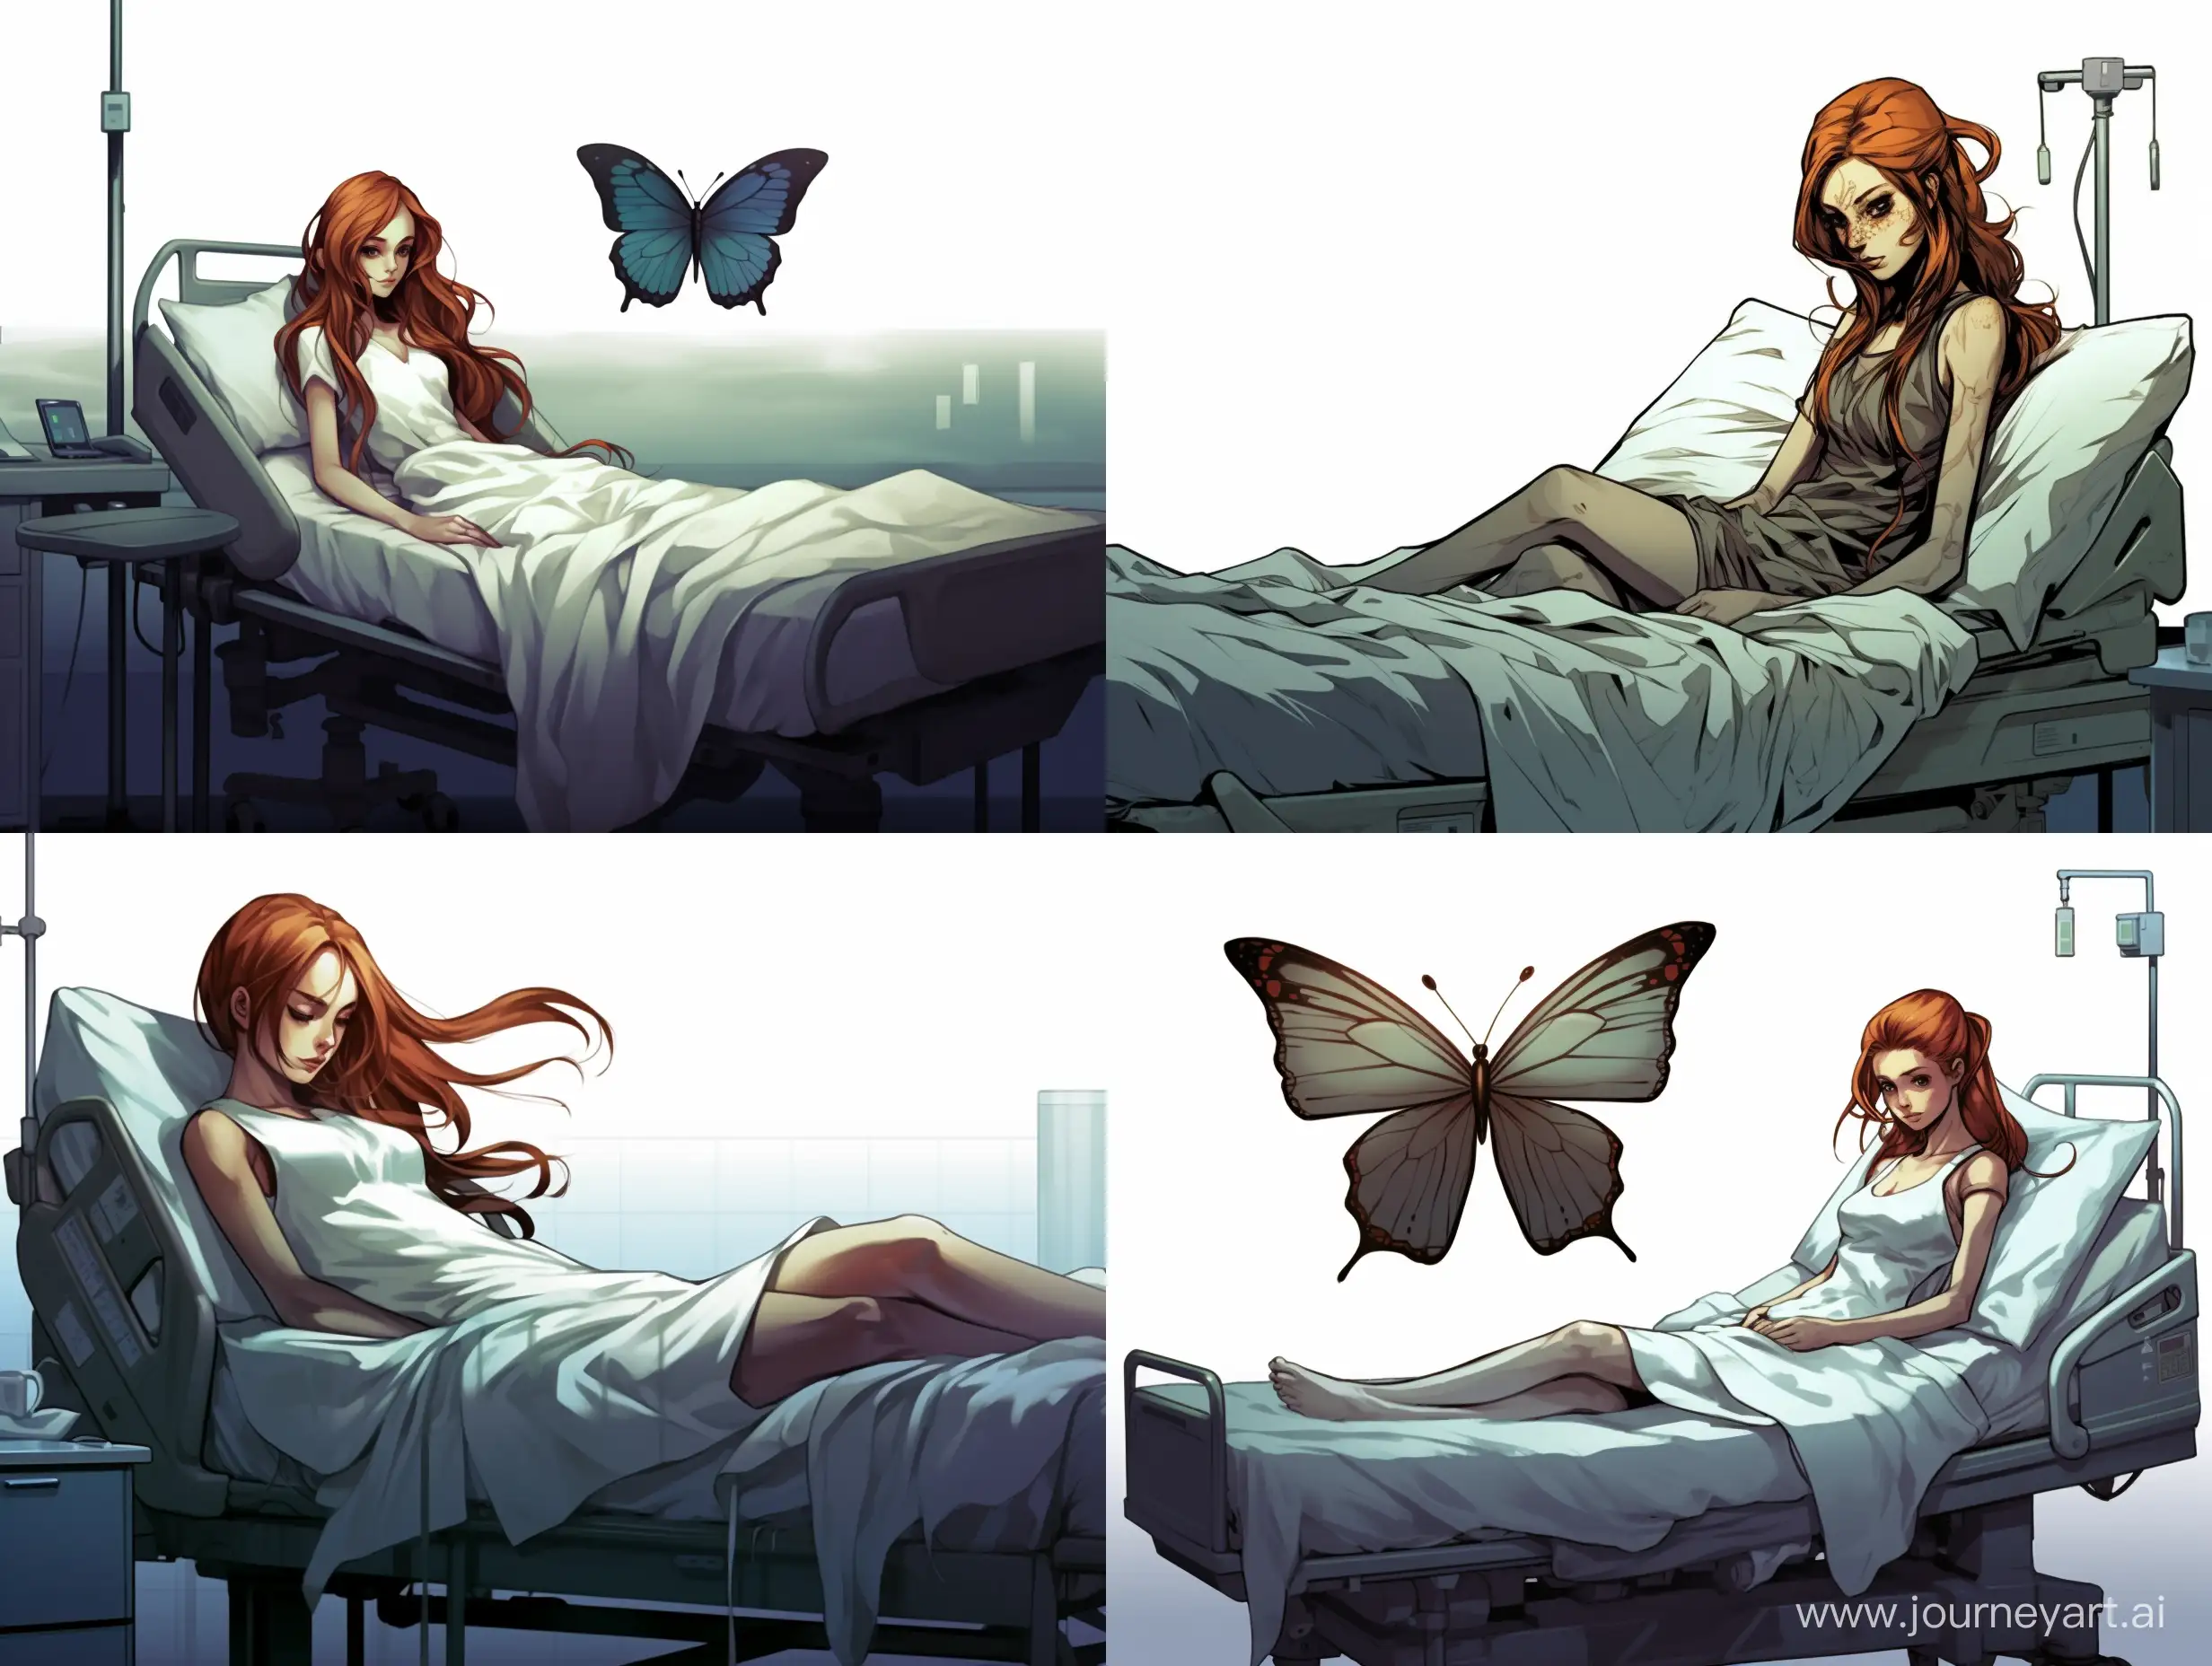 full body concept art mutant half ginger female human half mutated butterfly lay on the hospital bed 90'ths anime style